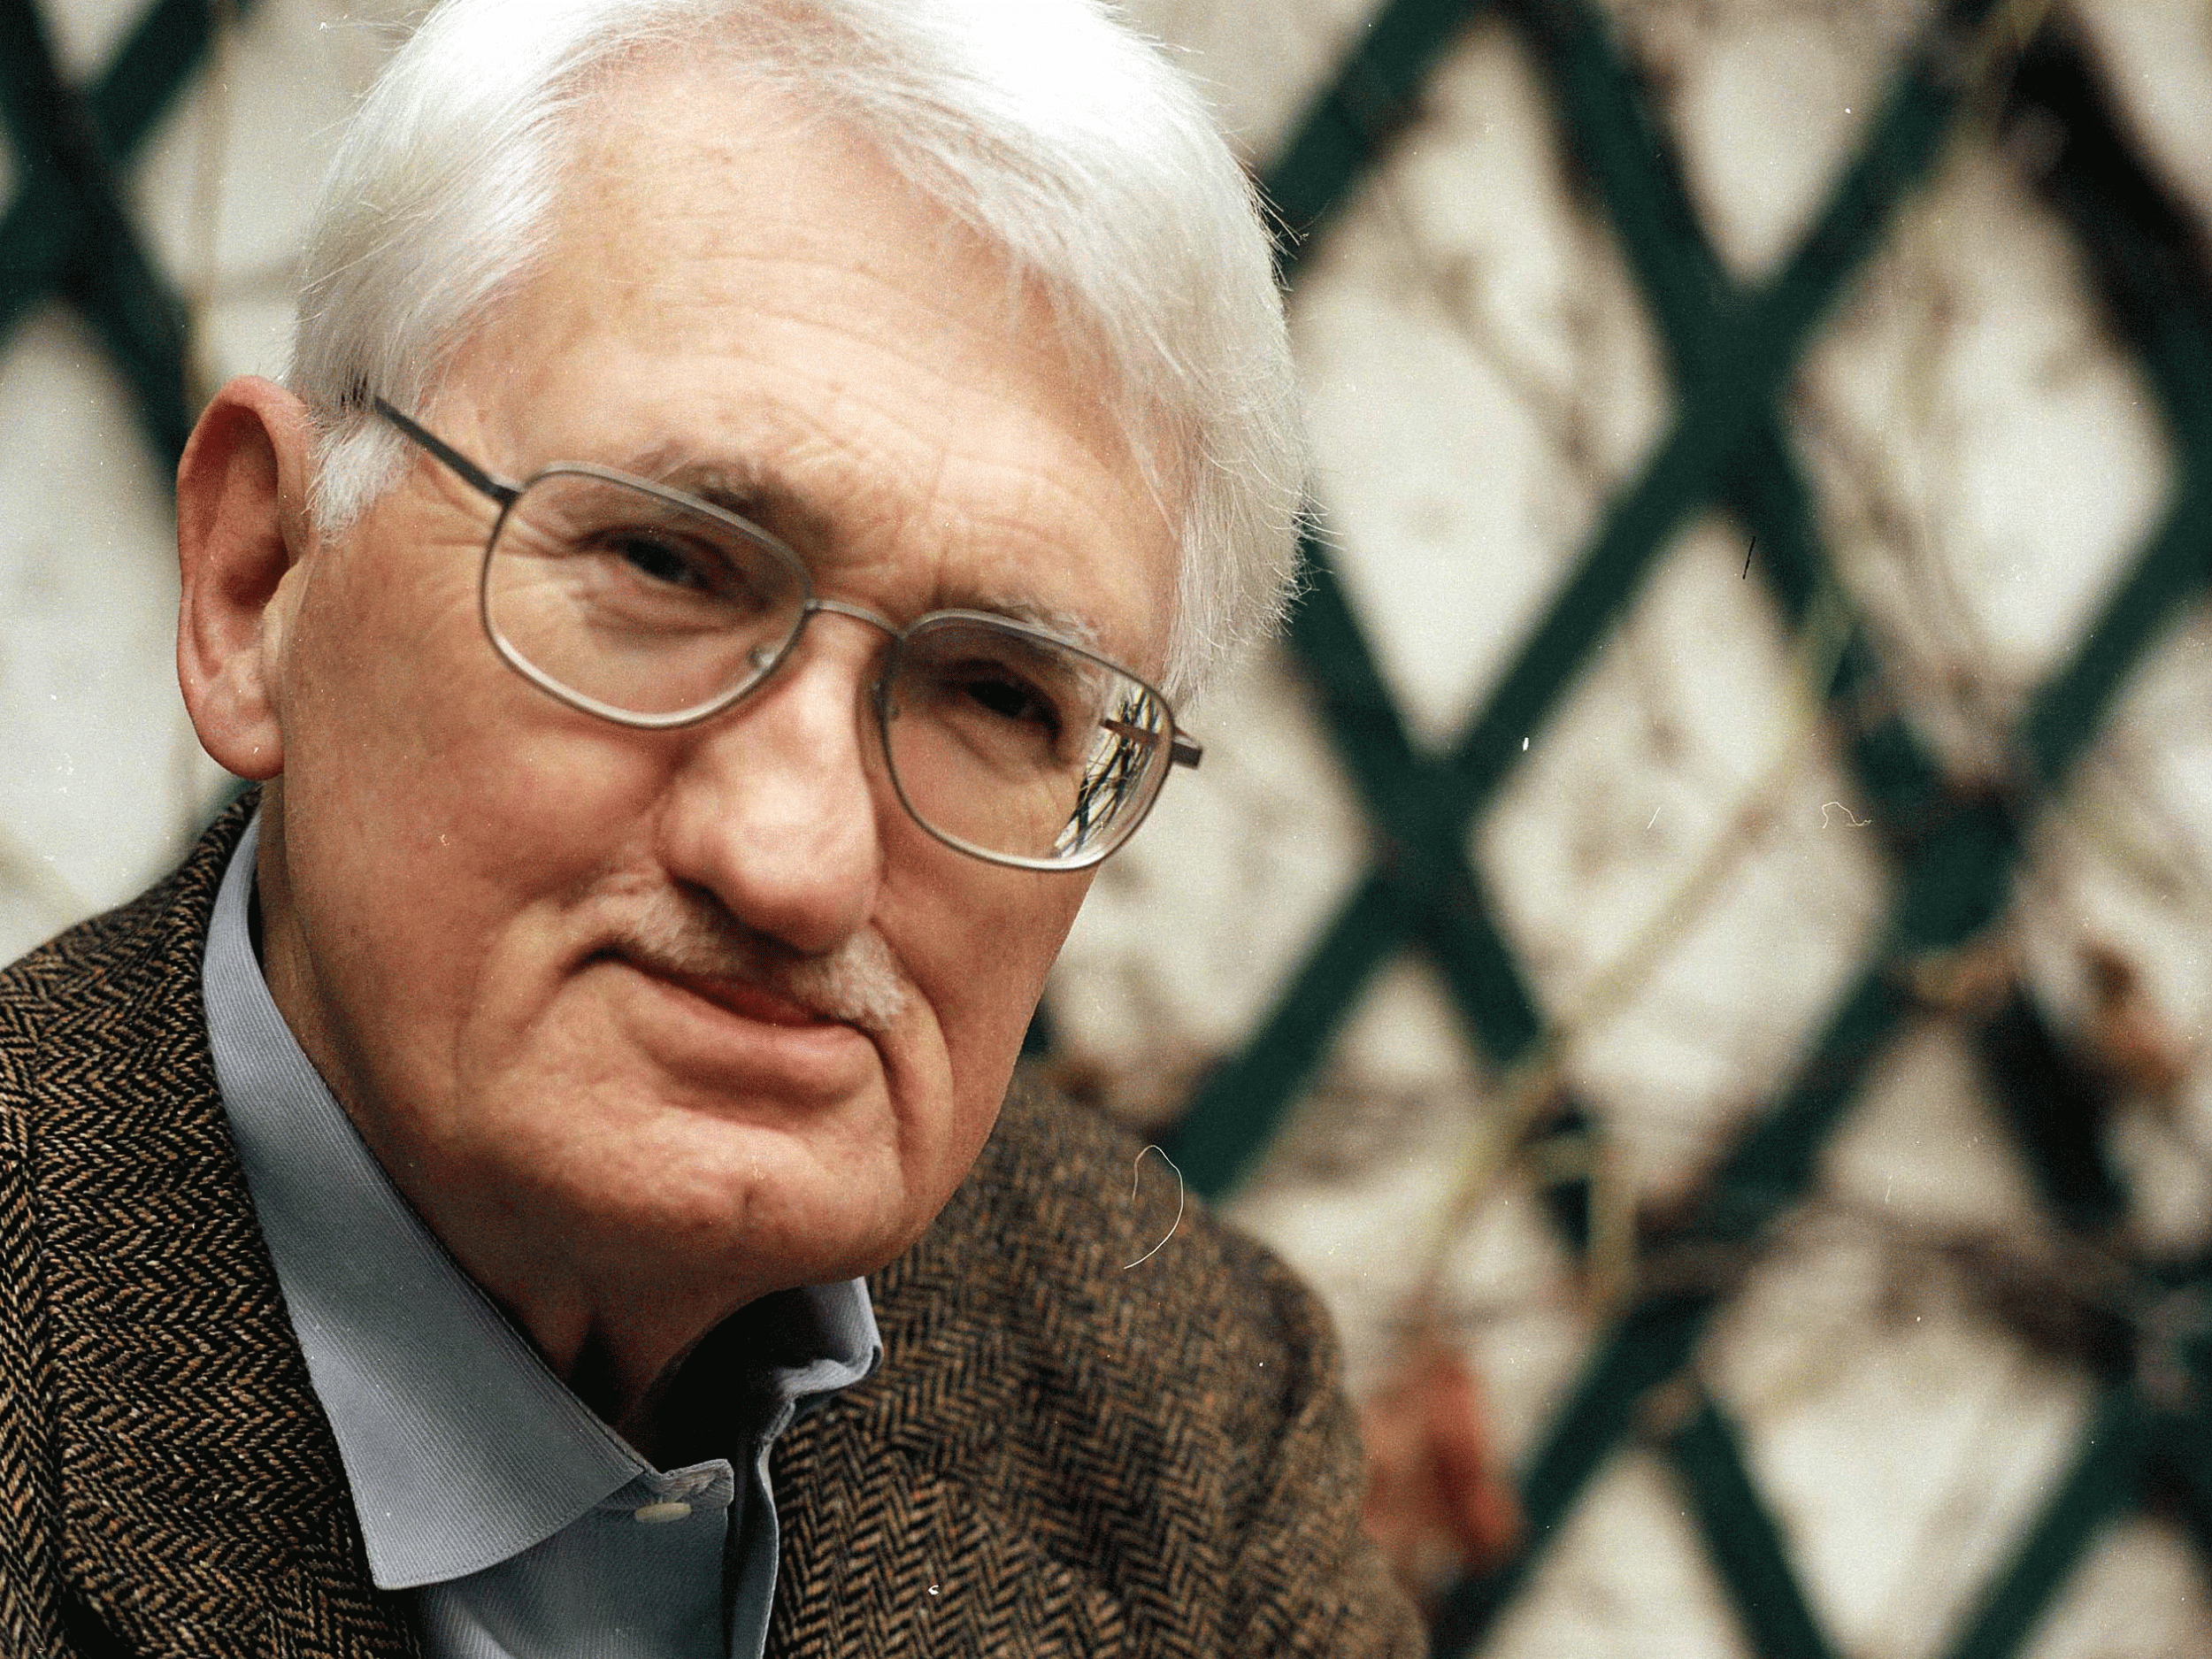 Professor Habermas said trying to appeal to right-wing groups by removing a "grand vision" of Europe would not work